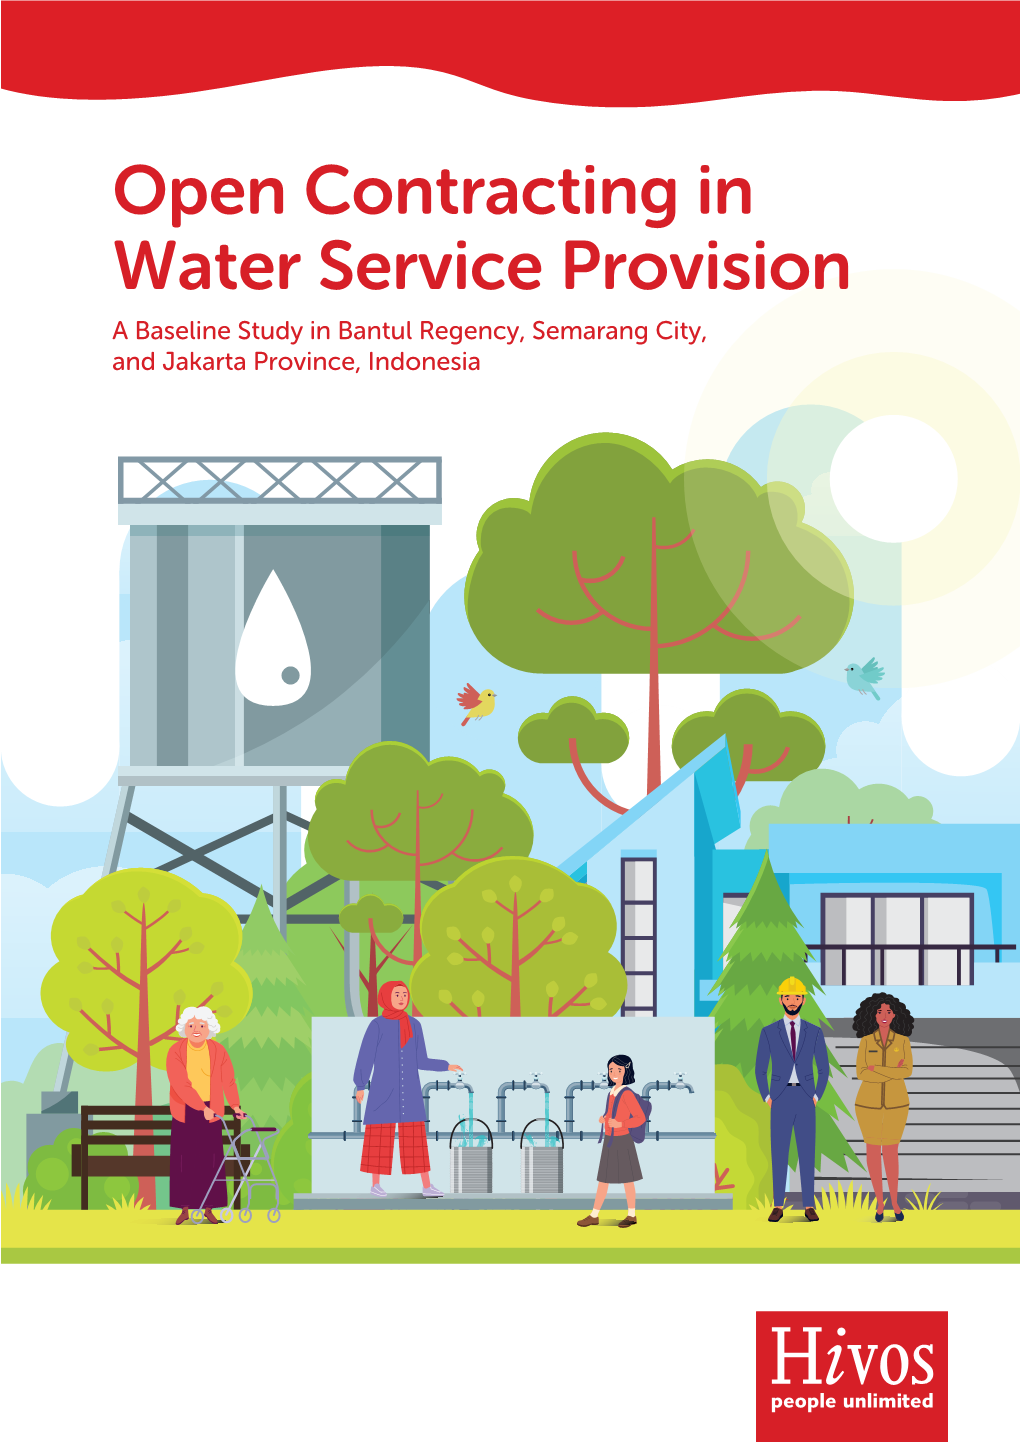 Open Contracting in Water Service Provision